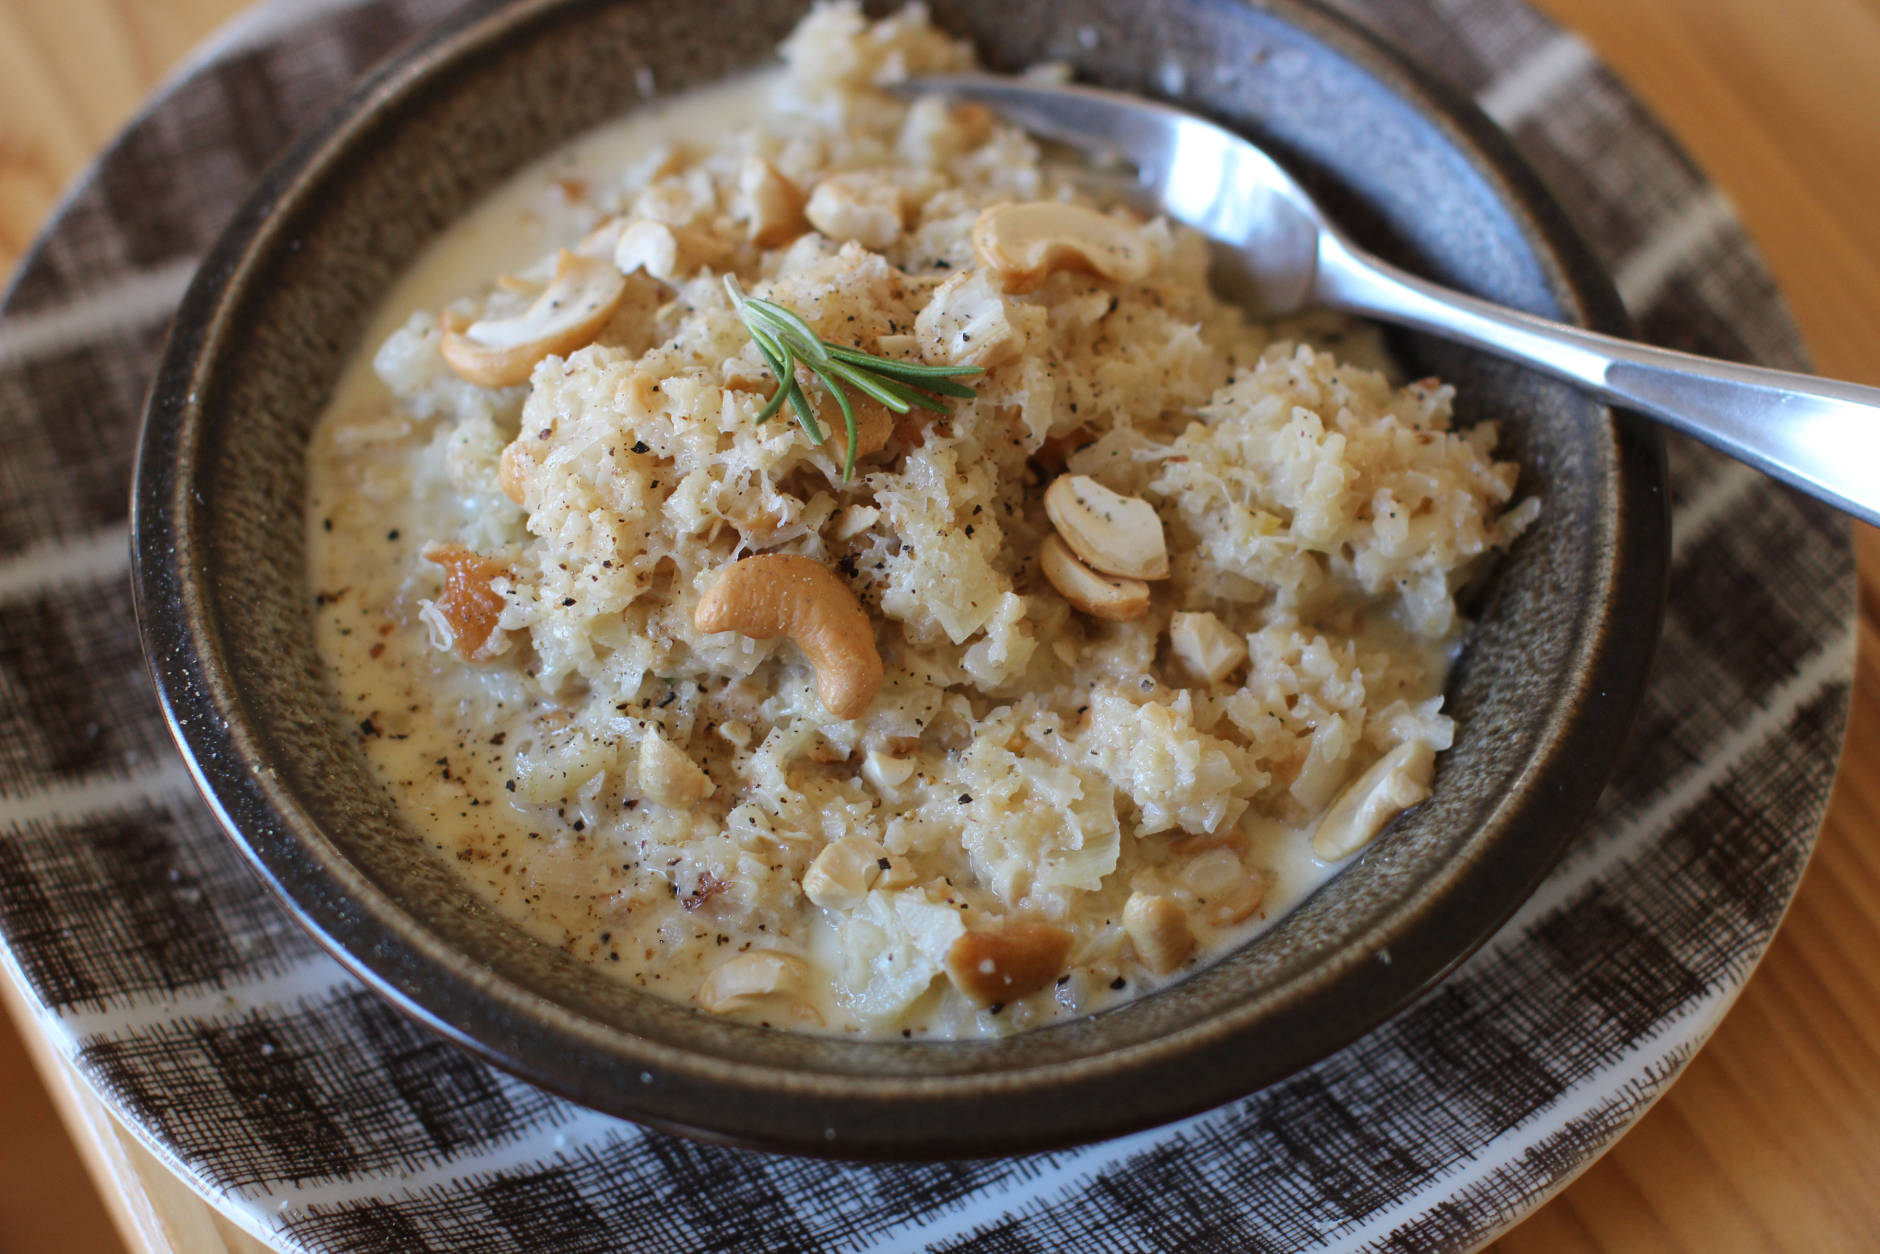 This Nov. 16, 2015 photo shows parmesan cashew cauliflower risotto in Concord, N.H. Transforming finely chopped cauliflower is so popular, grocers now sell bagged minced cauliflower labeled as ready to use in your favorite pizza crust and mashed potato-like recipes. (AP Photo/Matthew Mead)